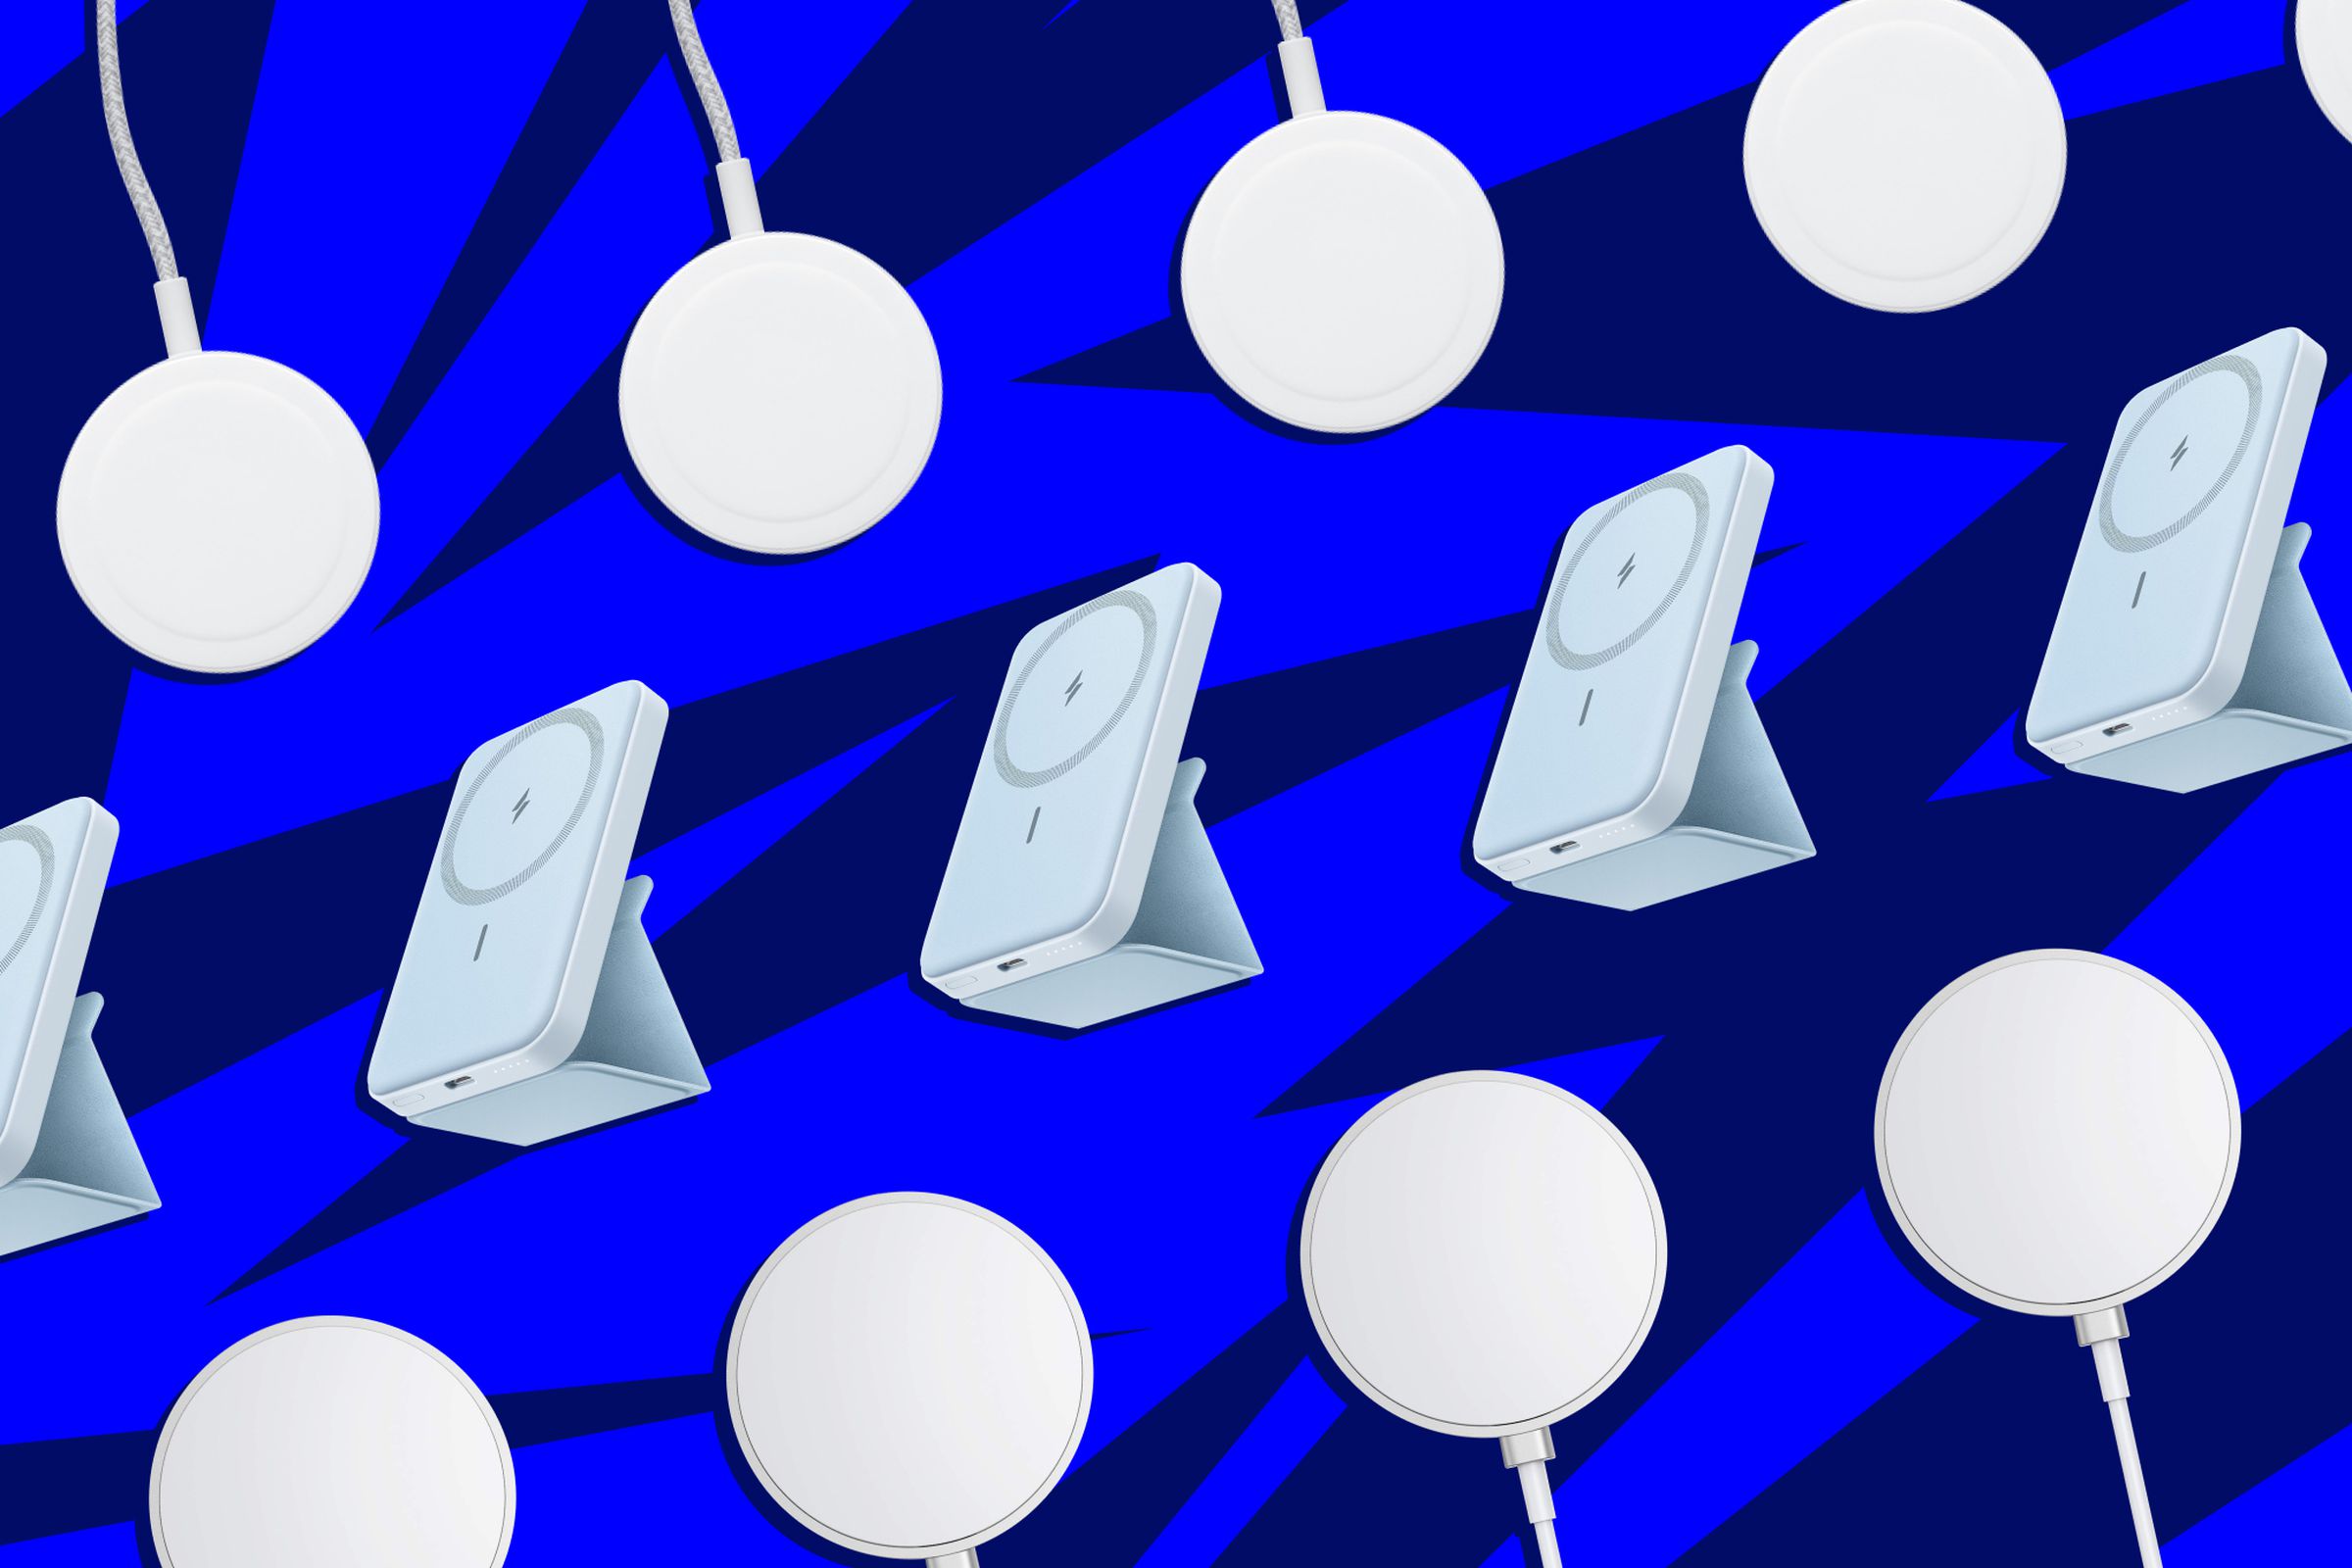 An illustration of repeating magnetic charging pucks and magnetic power banks, tiled across a dark blue background with a subtle lightning bolt pattern.